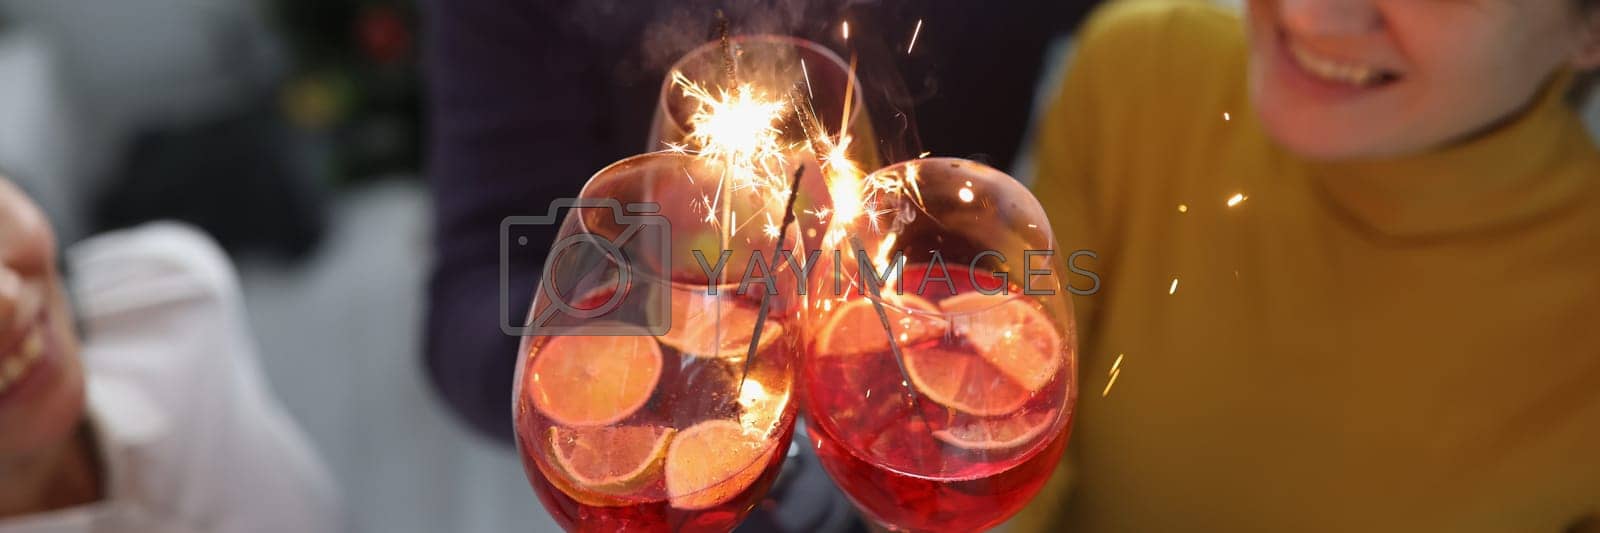 Royalty free image of Group of happy people enjoying fireworks party in cocktail glasses by kuprevich